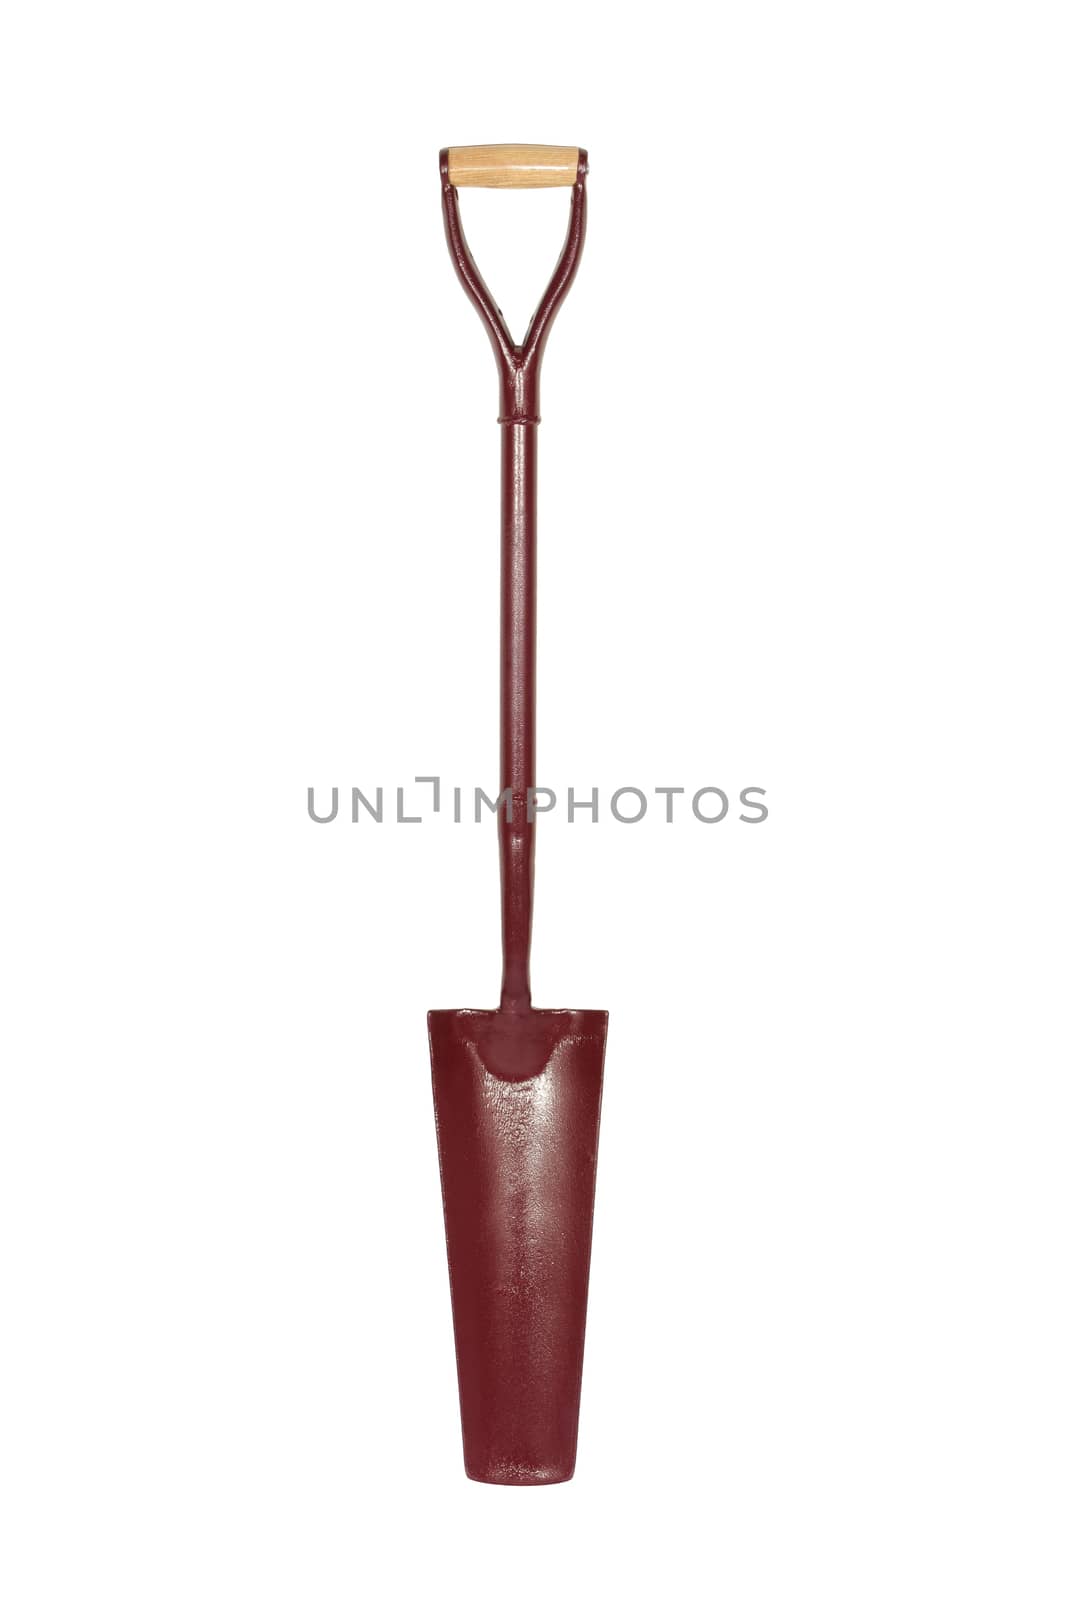 A Steel Shovel Draining Myd isolated on white with clipping path